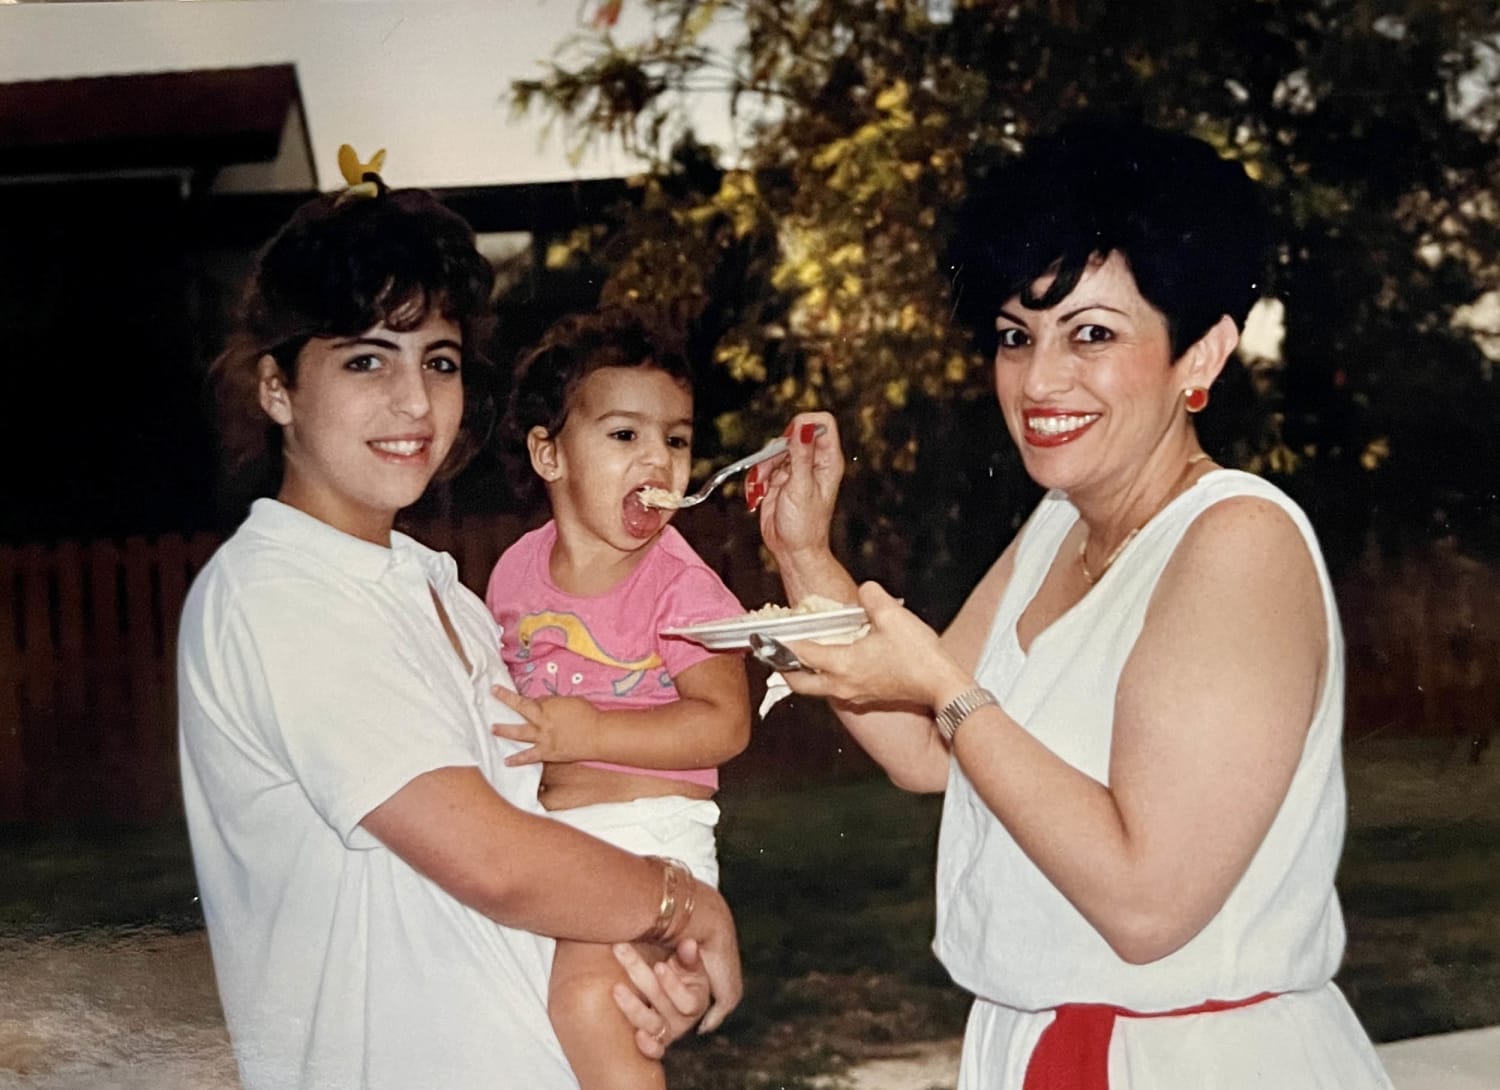 Grandmother knows best: Cuban American women tout their abuelas’ cooking and life lessons